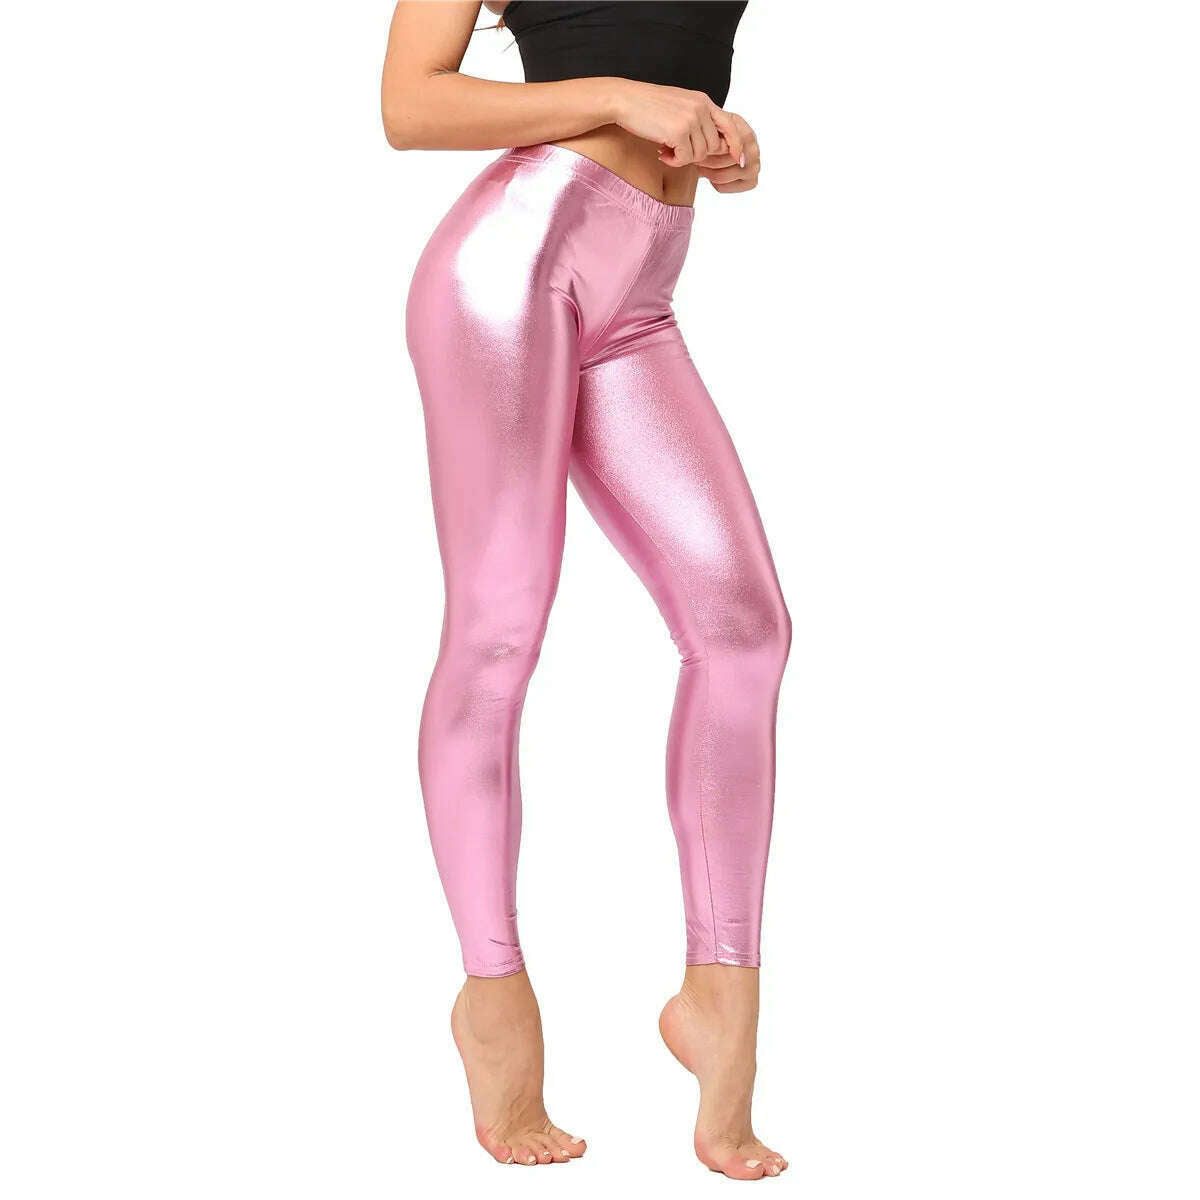 KIMLUD, Metallic Color PU Leggings Women Faux Leather Pants Dancing Party Pant Sexy Night Club Skinny Costume Pants Tight Trousers, Pink / One size 50kg below, KIMLUD Women's Clothes